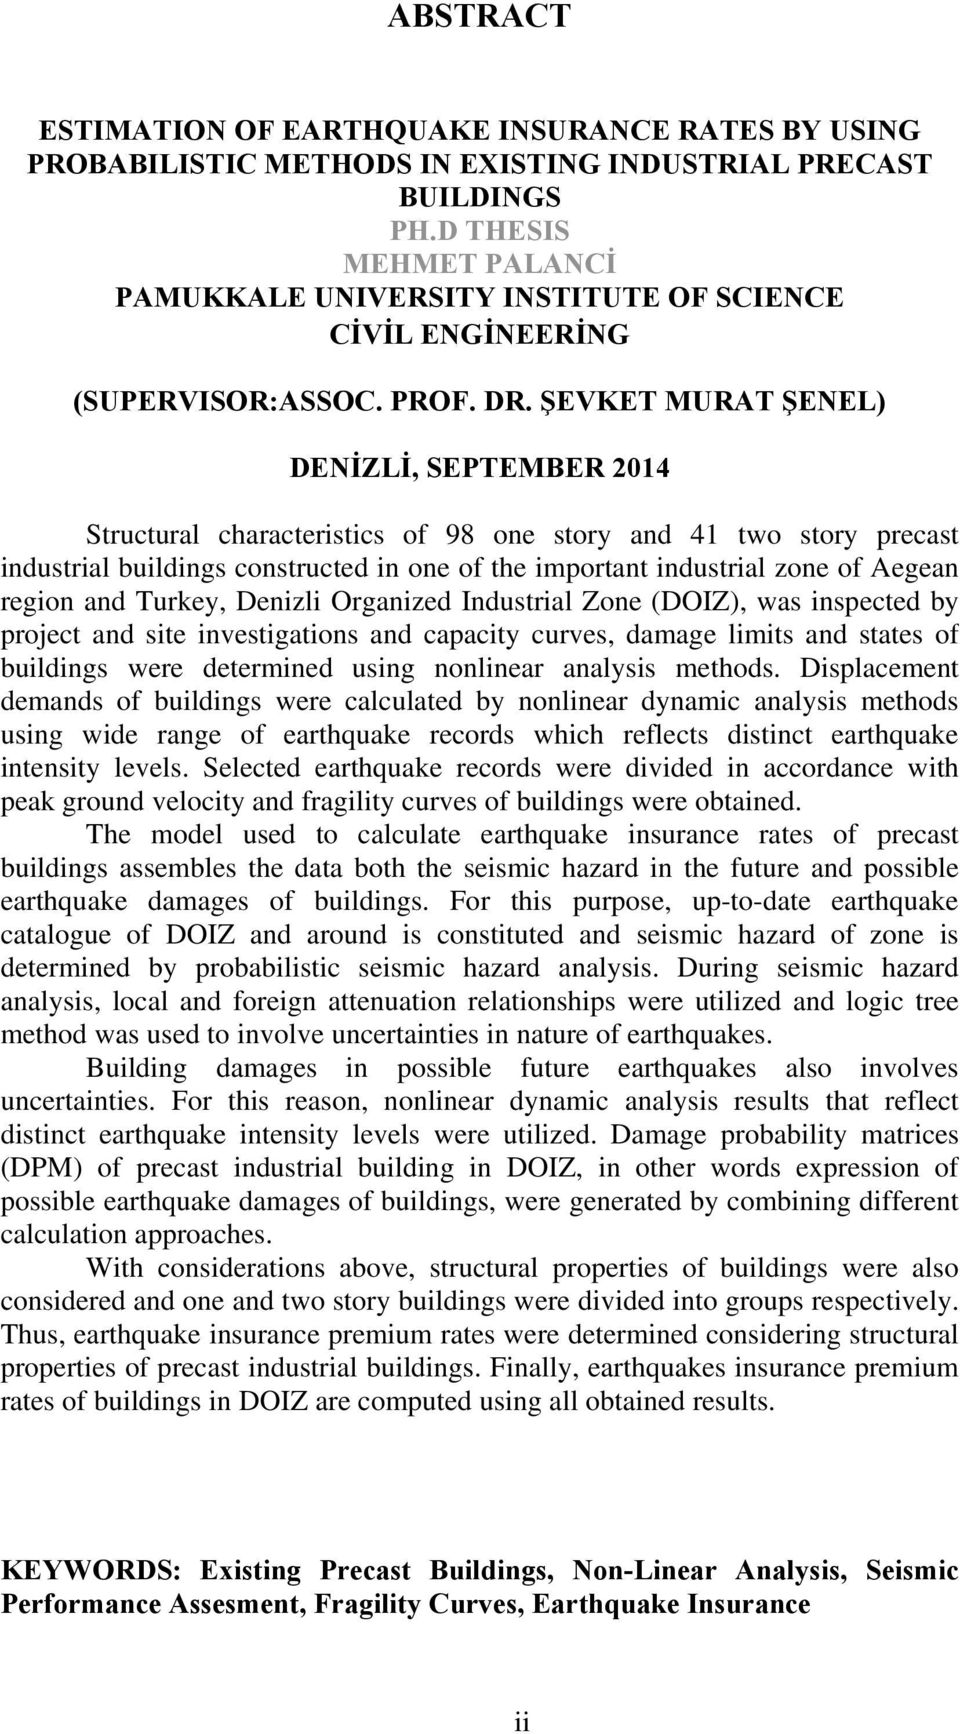 ŞEVKET MURAT ŞENEL) DENİZLİ, SEPTEMBER 2014 Structural characteristics of 98 one story and 41 two story precast industrial buildings constructed in one of the important industrial zone of Aegean